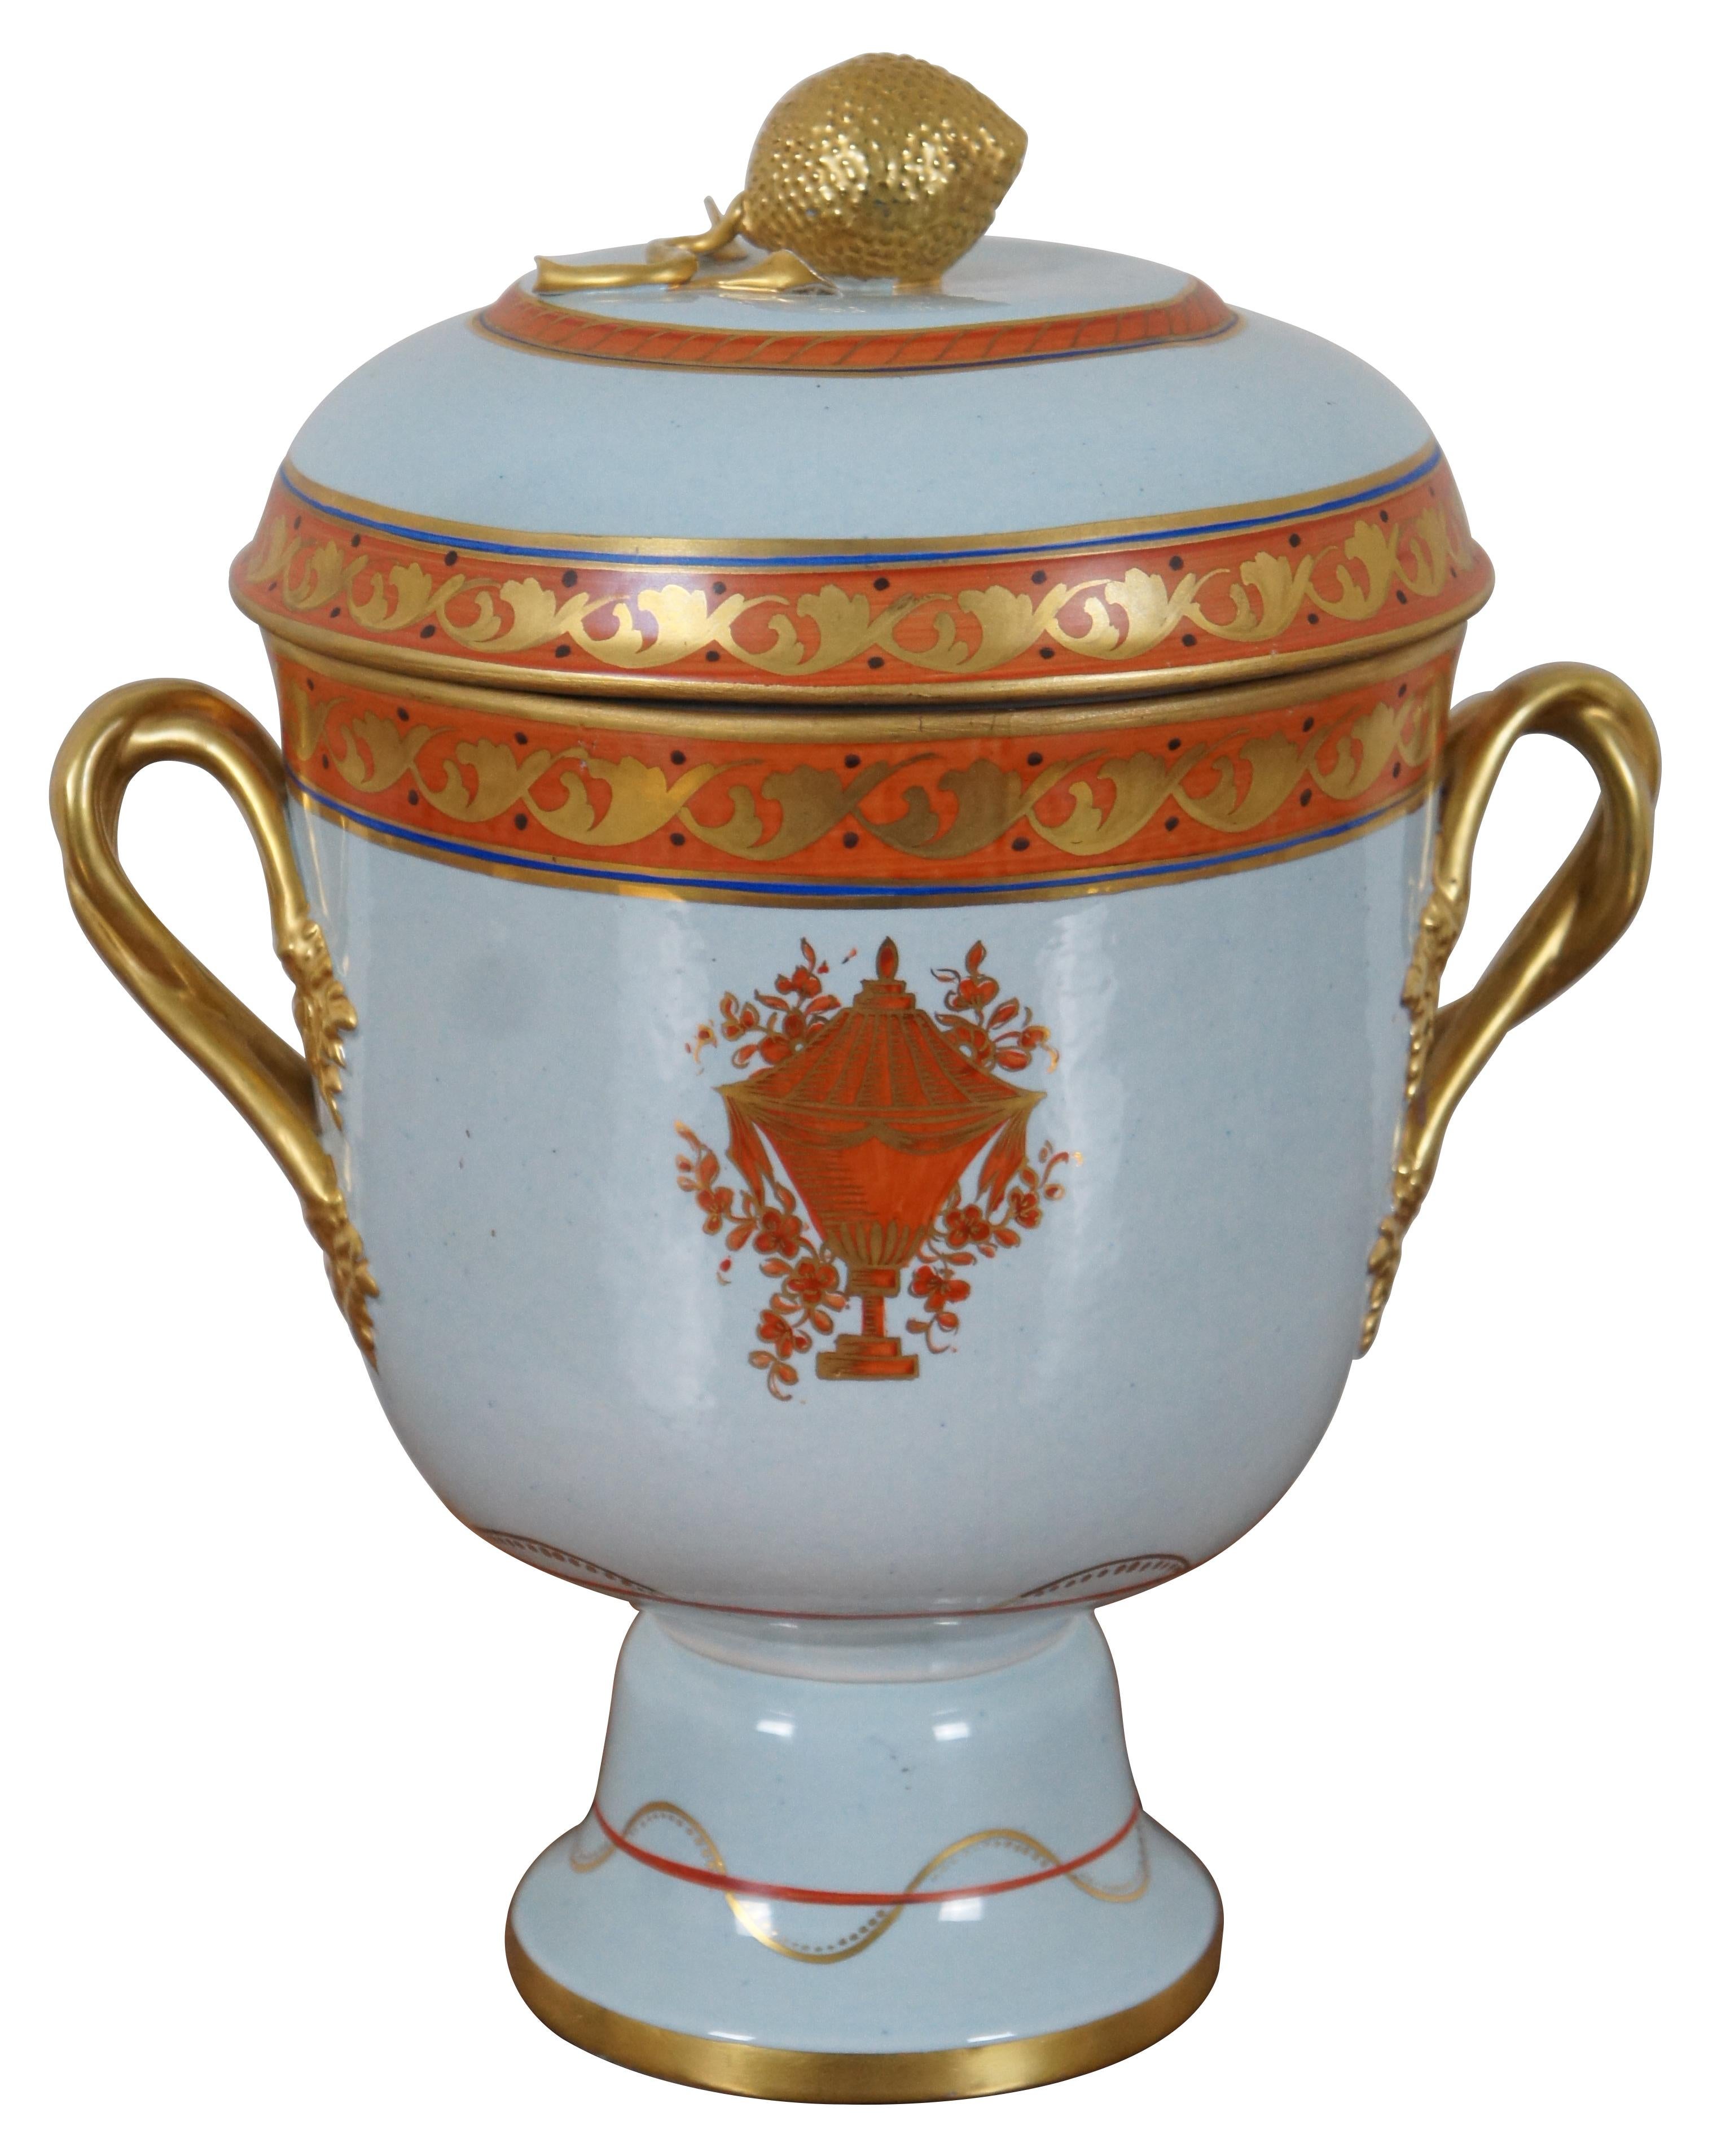 Pair of vintage mid 20th century reproduction Lowestoft style porcelain by Mottahedeh, one lidded cachepot and one tea pot, featuring a lightly blue tinted base, decorated with vase, foliate, and floral designs in orange, blue and gold, with fruit